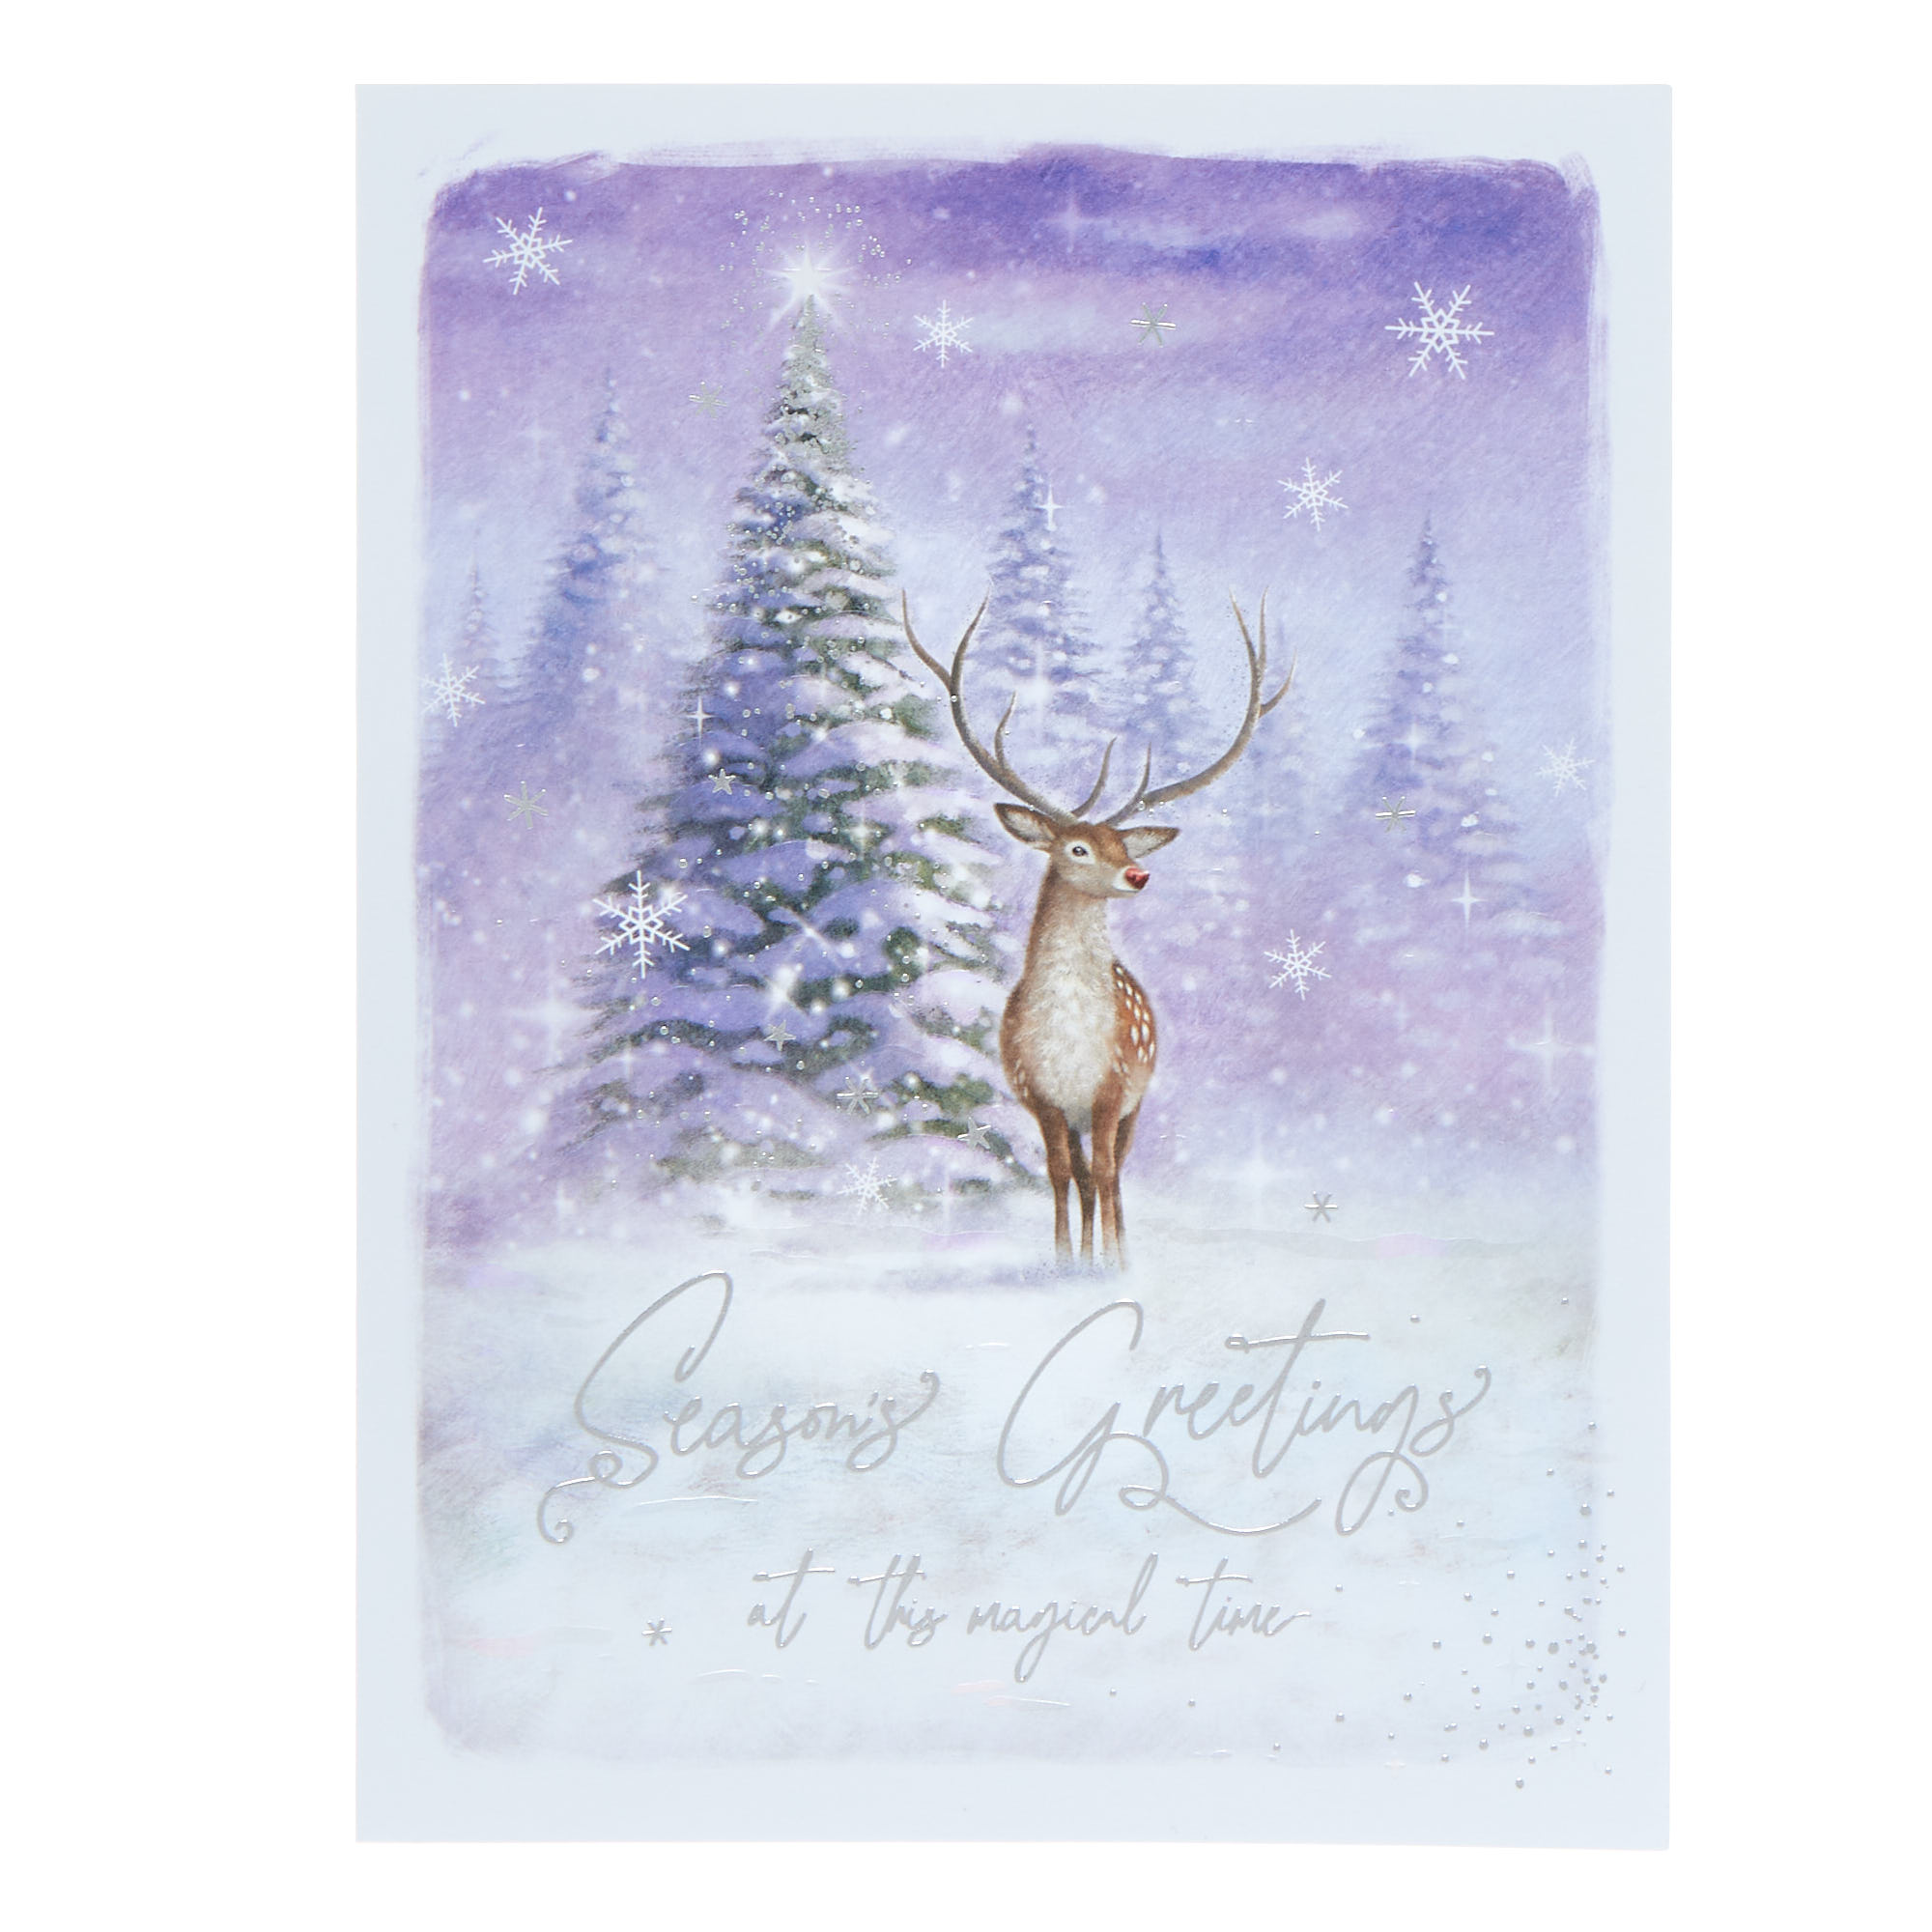 10 Deluxe Boxed Charity Christmas Cards - Robin & Stag (2 Designs)